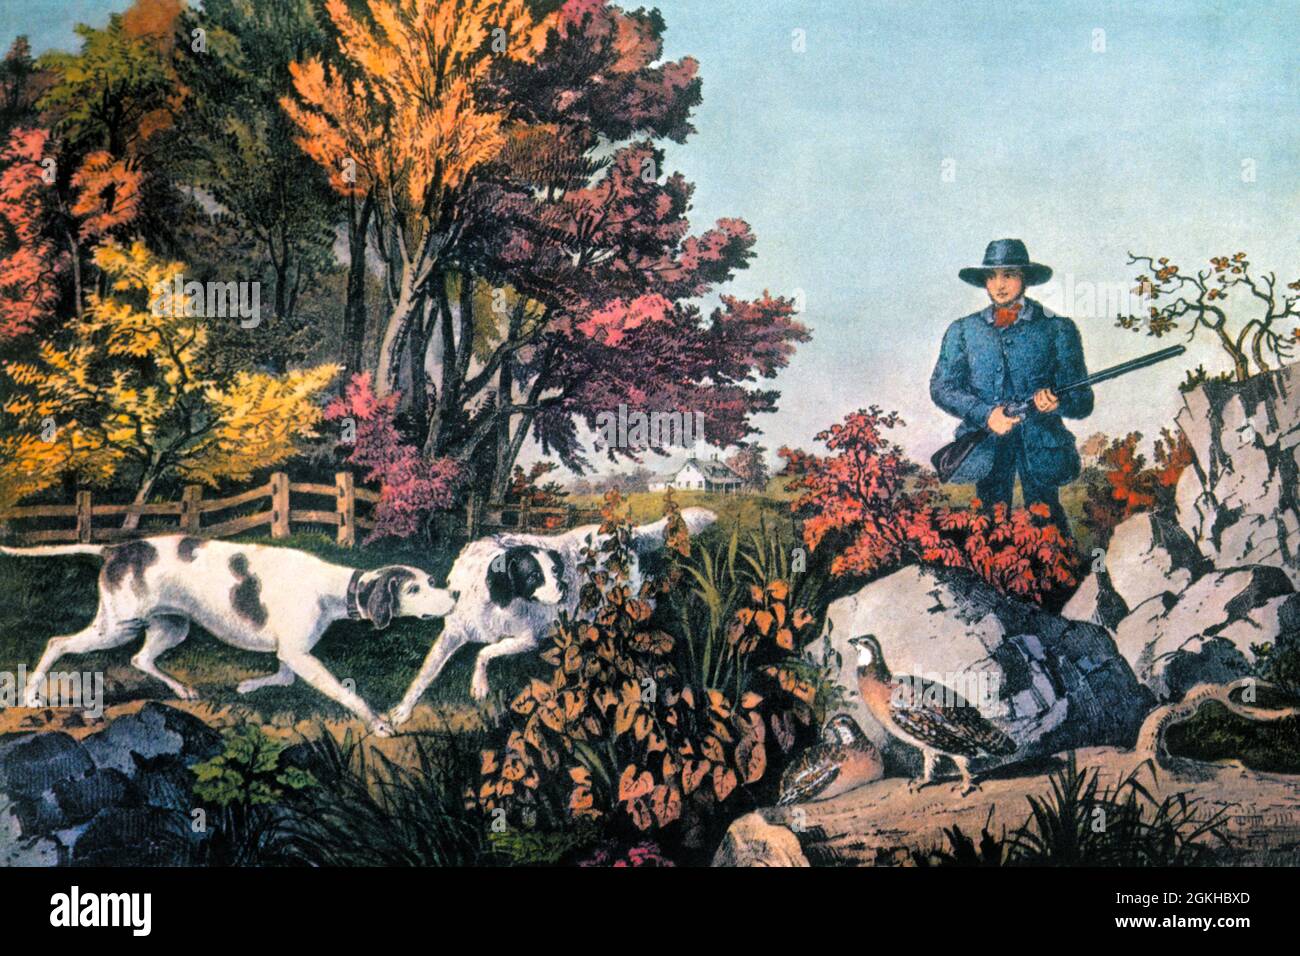 1850s MAN HUNTER WITH FOWLING PIECE WITH TWO DOGS POINTING TWO PARTRIDGES GAME BIRD SHOOTING CURRIER & IVES LITHOGRAPH 1855 - ka6495 LAN001 HARS COPY SPACE FULL-LENGTH PHYSICAL FITNESS PERSONS UNITED STATES OF AMERICA HEAVY MALES HUNTER HUNT NORTH AMERICA NORTH AMERICAN WING HAPPINESS MAMMALS ADVENTURE PERCUSSION AND CANINES EXCITEMENT RECREATION FALL SEASON OPPORTUNITY FLINTLOCK LITHOGRAPH POOCH 1855 CONCEPTUAL CHICKENS ESCAPE STYLISH TURKEYS VERTEBRATE WARM-BLOODED CURRIER & IVES CURRIER AND IVES PHEASANTS QUARRY 1850s CANINE CURRIER FEATHERED FIREARM FIREARMS HUNTERS IVES MAMMAL NEST Stock Photo